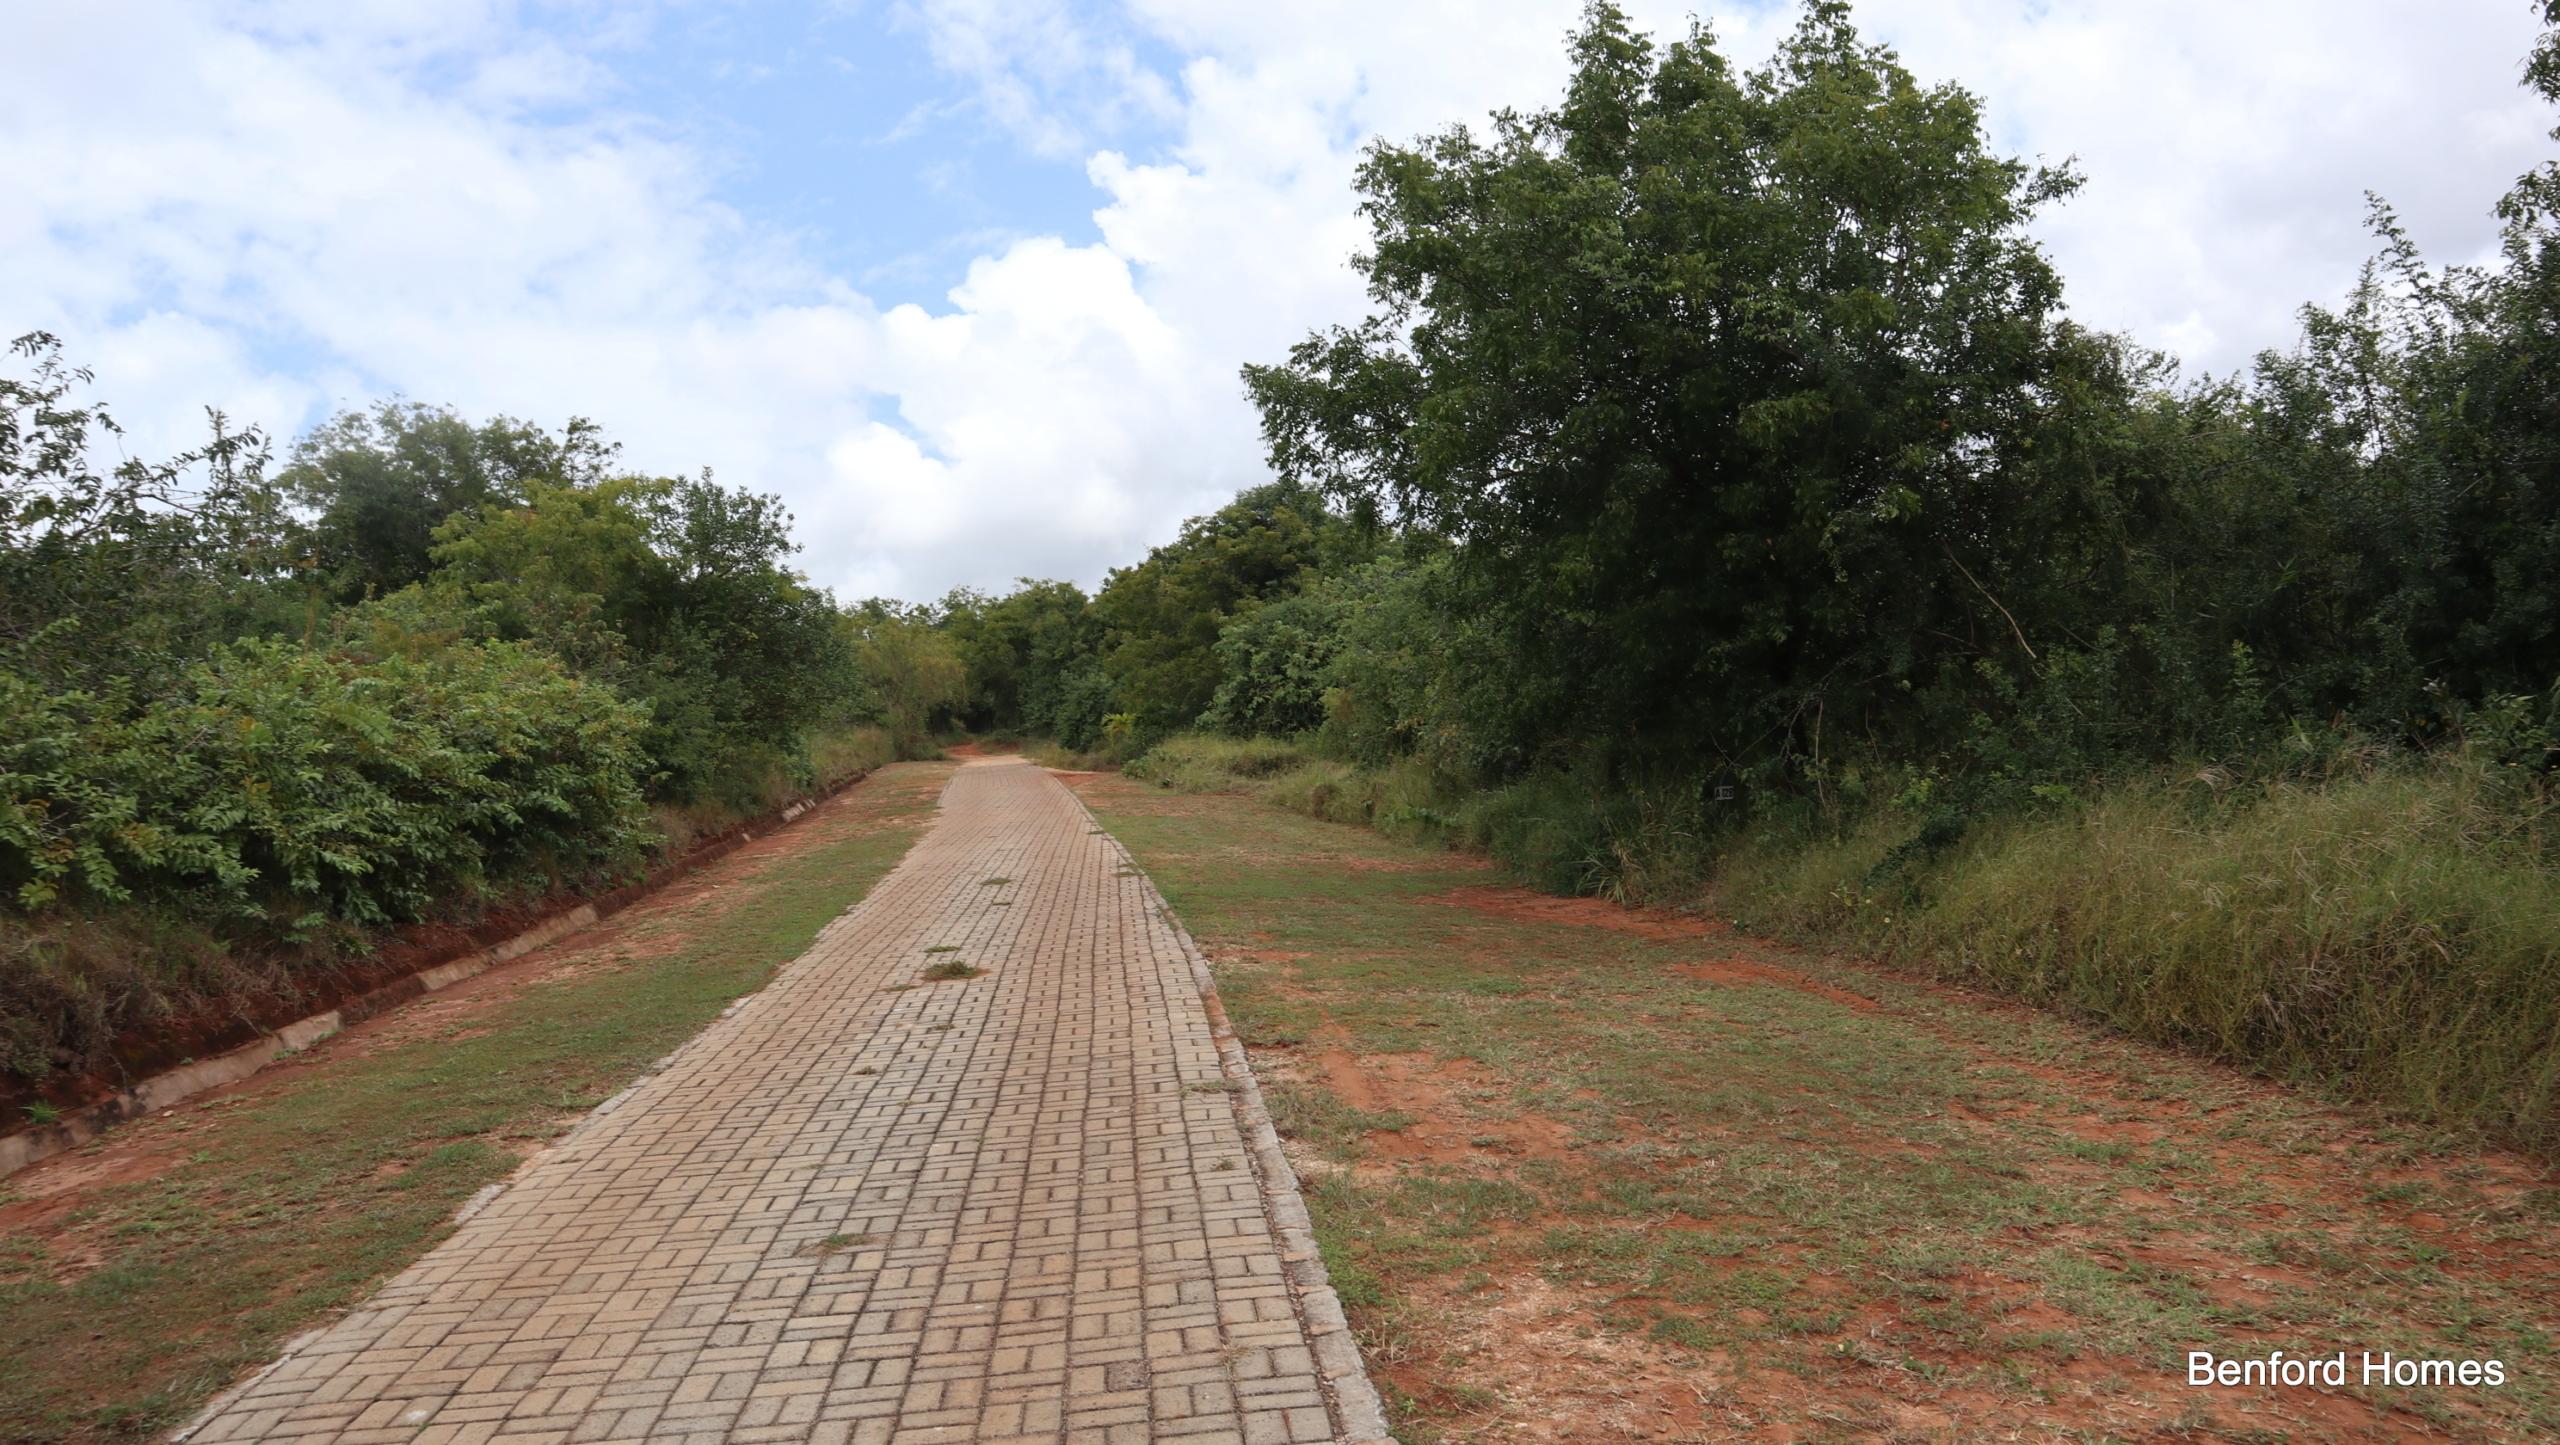 2.4 Acre prime land with access road and green lush vegetation| Benford Homes